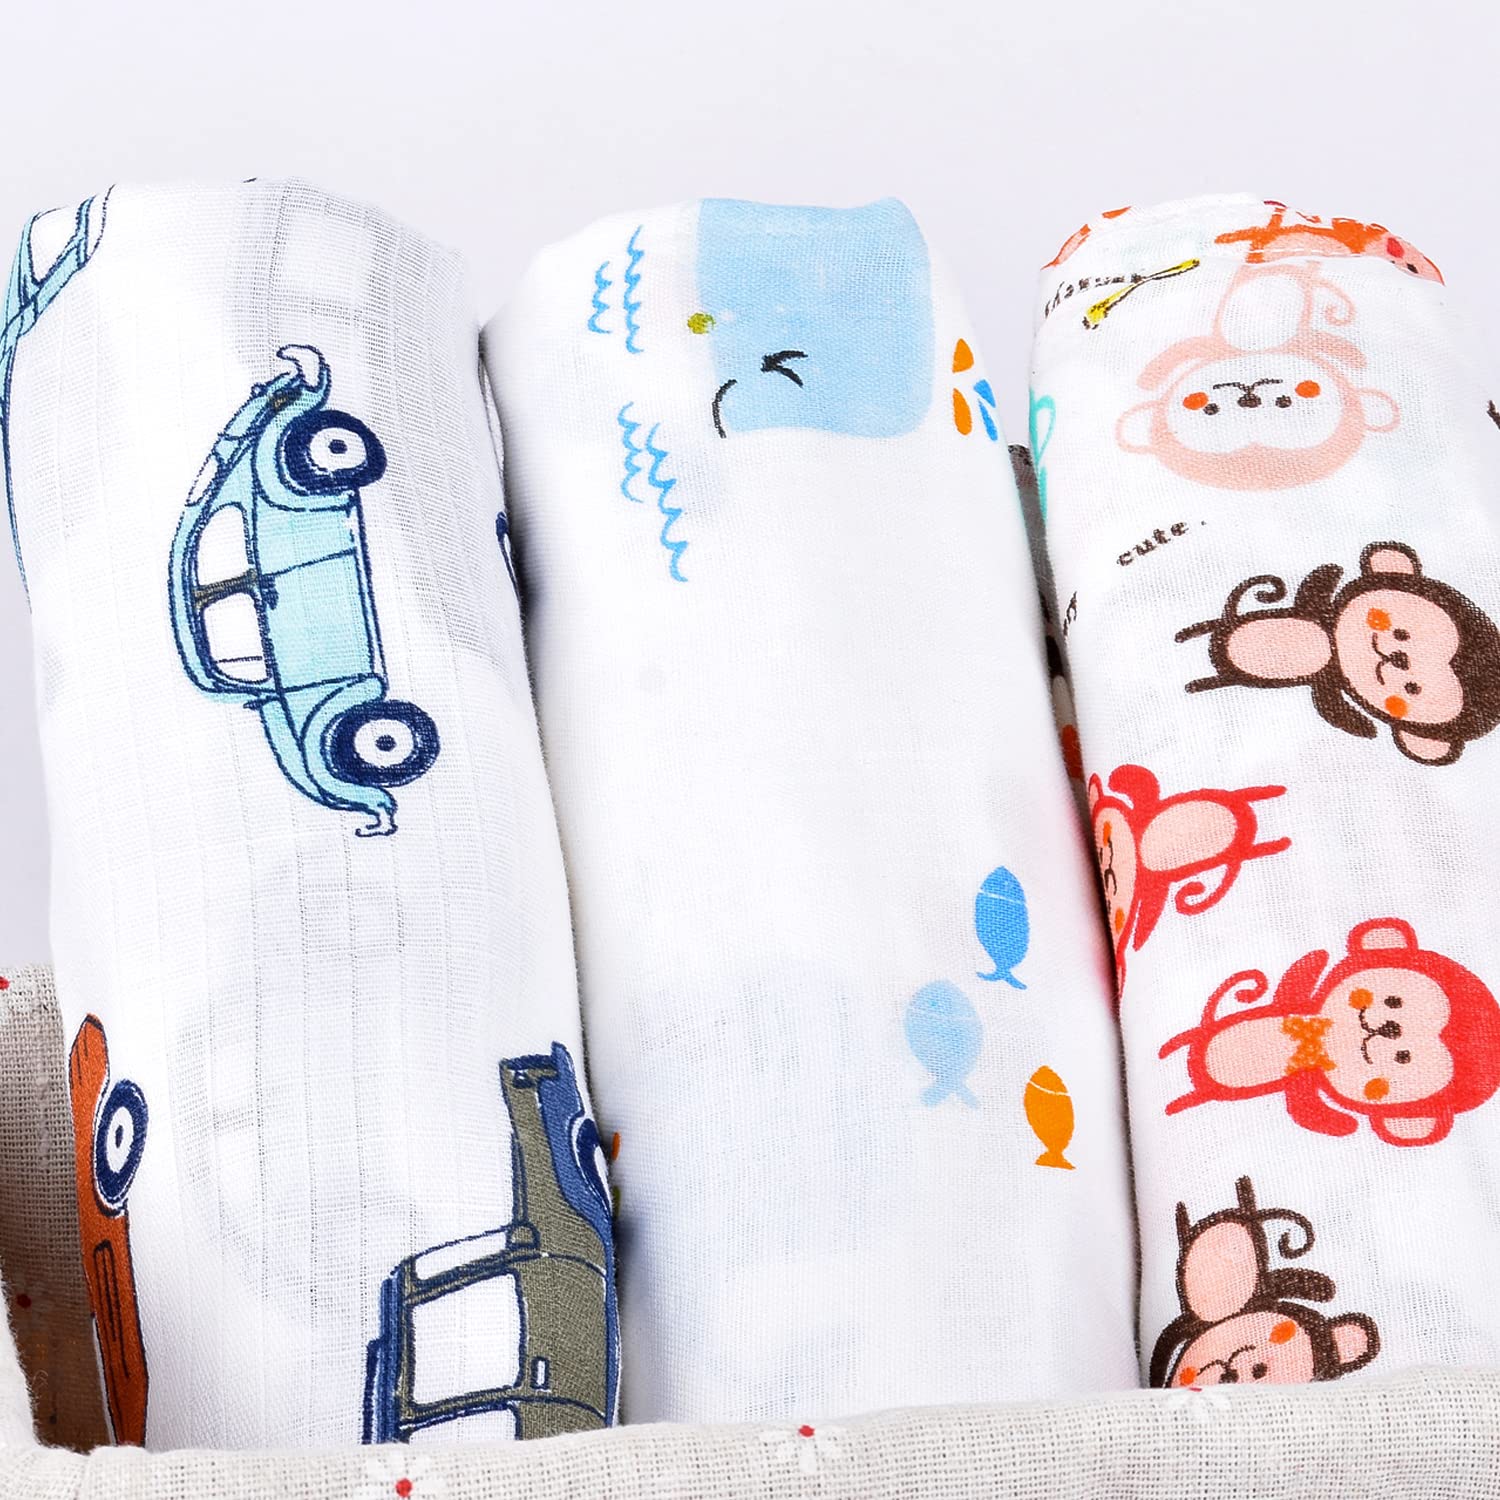 Mom's Home Baby Swaddle Wrap Organic Muslin cotton - 100x100 cm - Pack of 3 - Monkey, Whale, Car